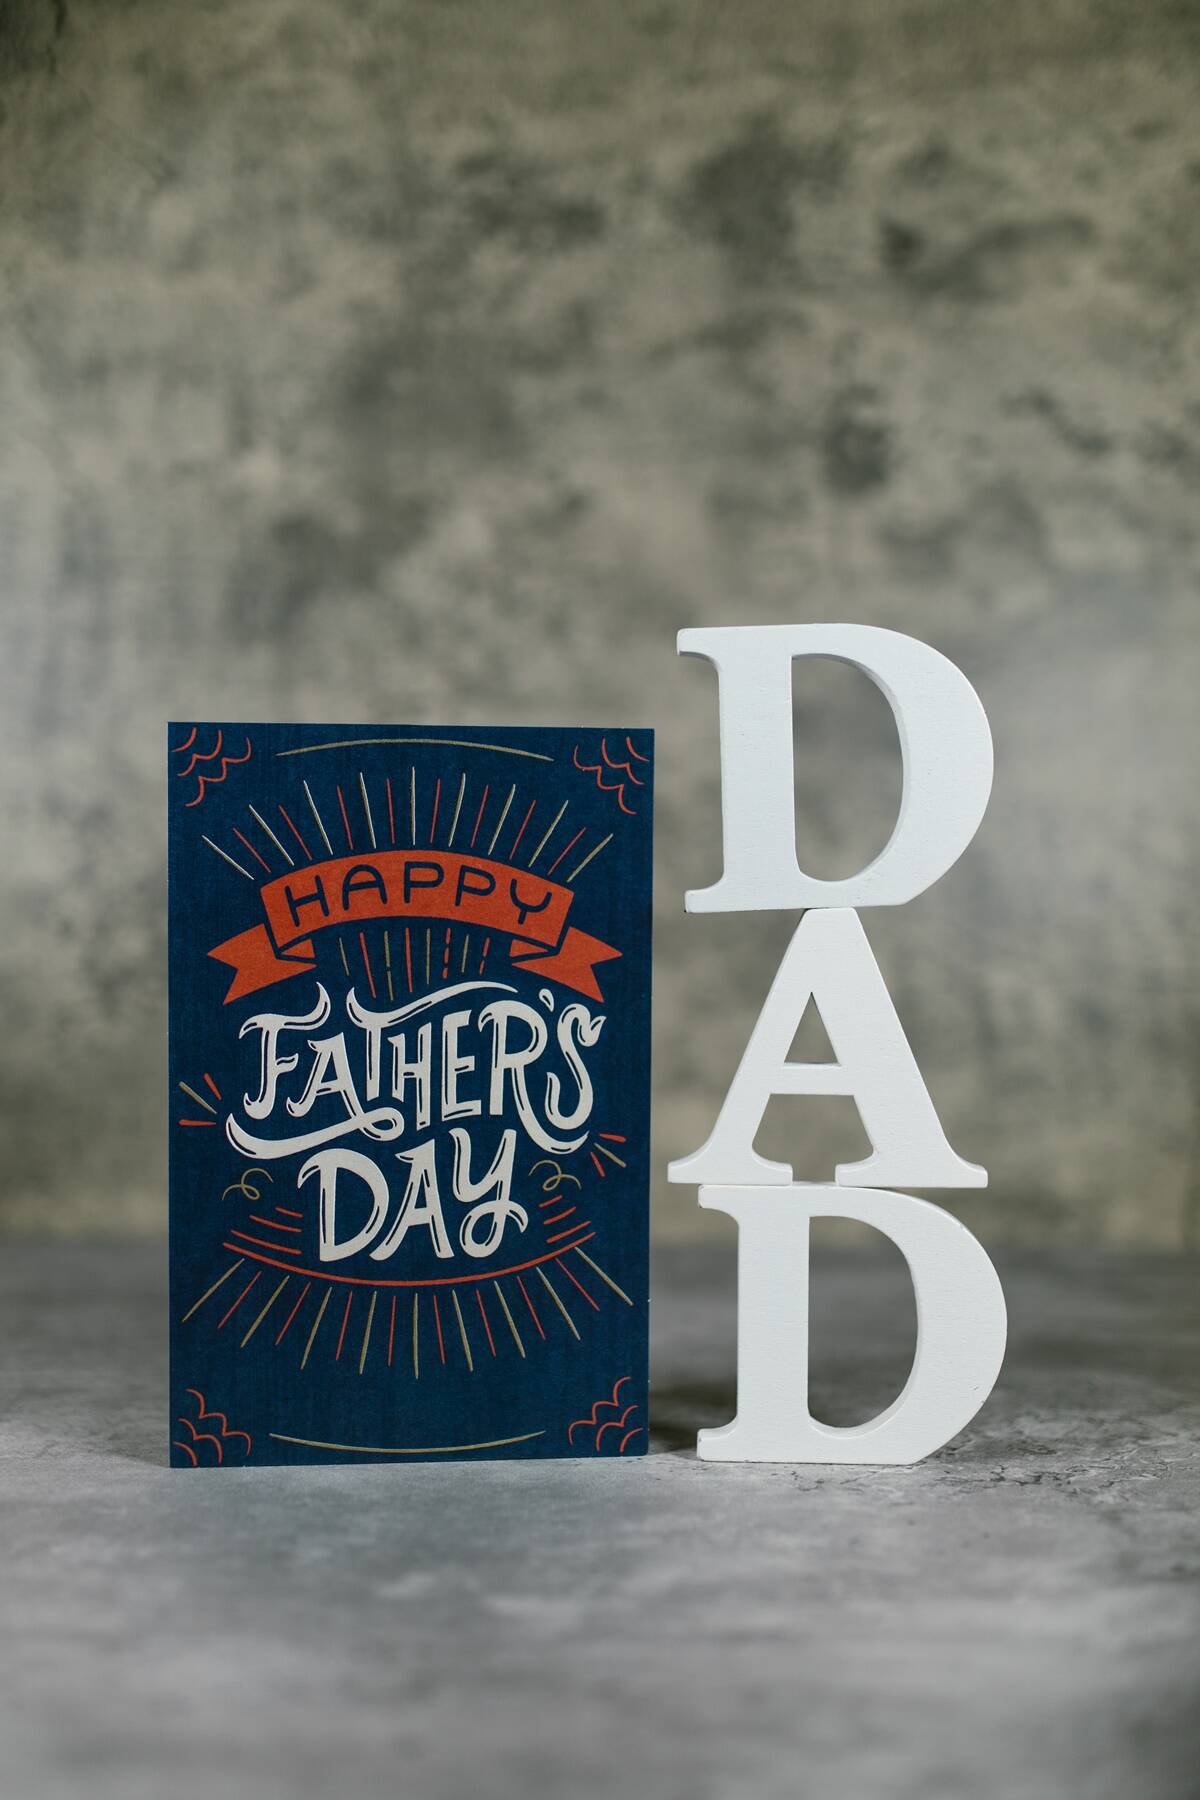 You are currently viewing Happy Father's Day 2022: Wishes, Images, Quotes, Whatsapp …